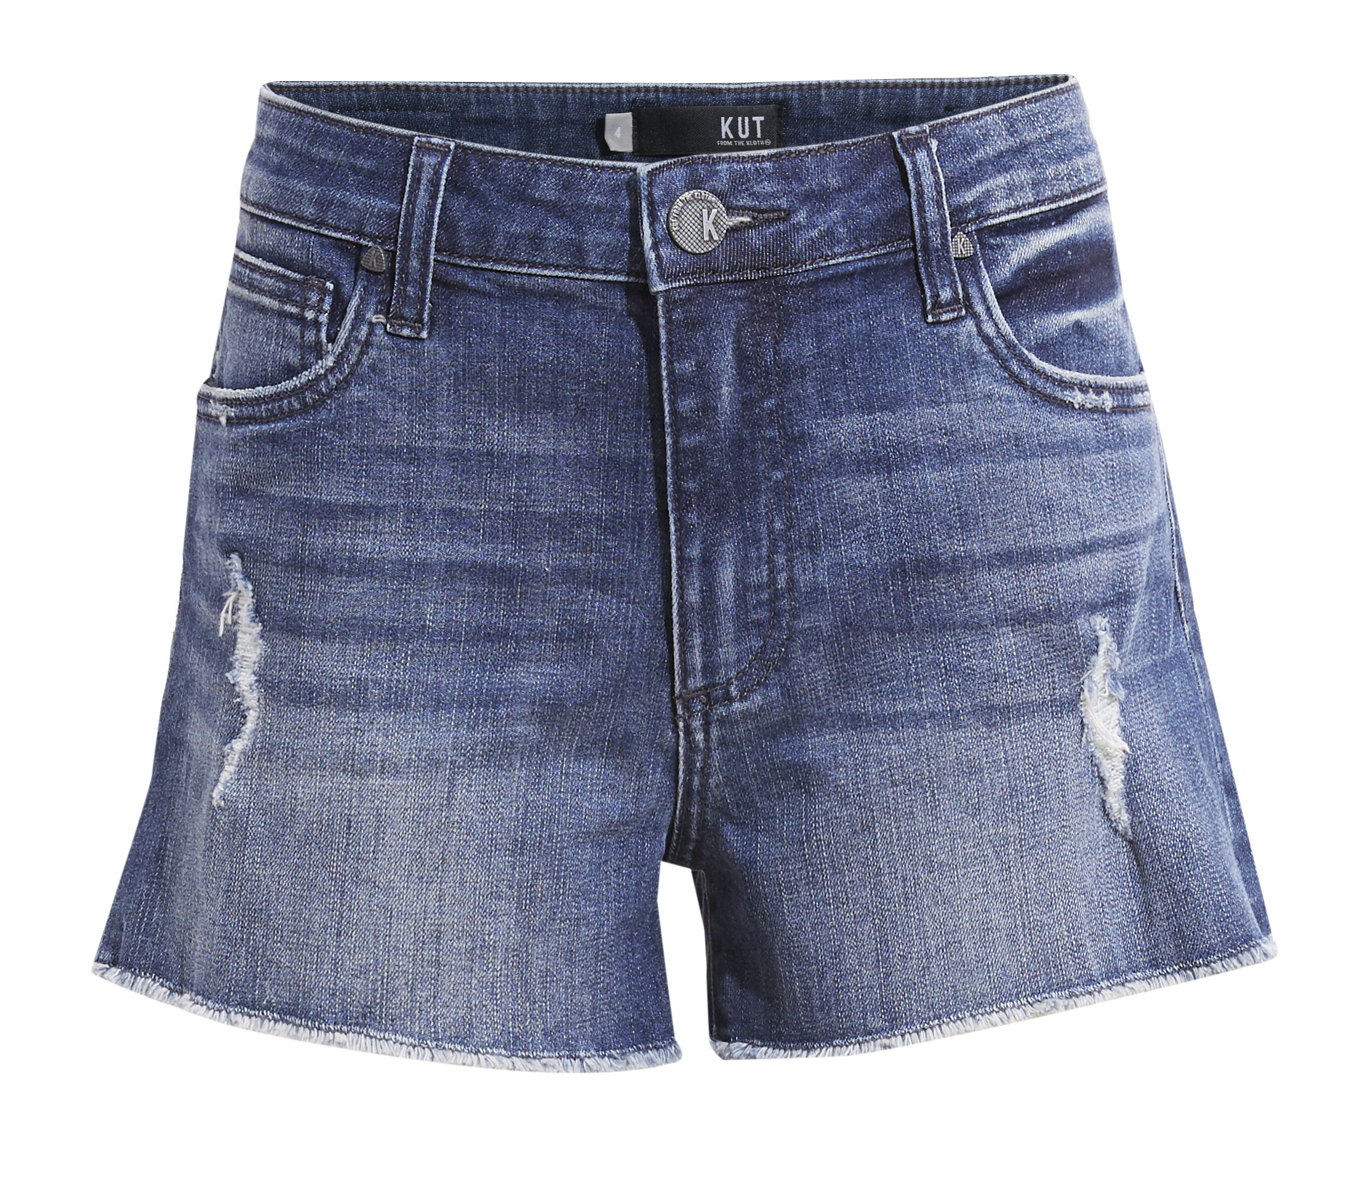 KUT from the Kloth High Rise Shorts